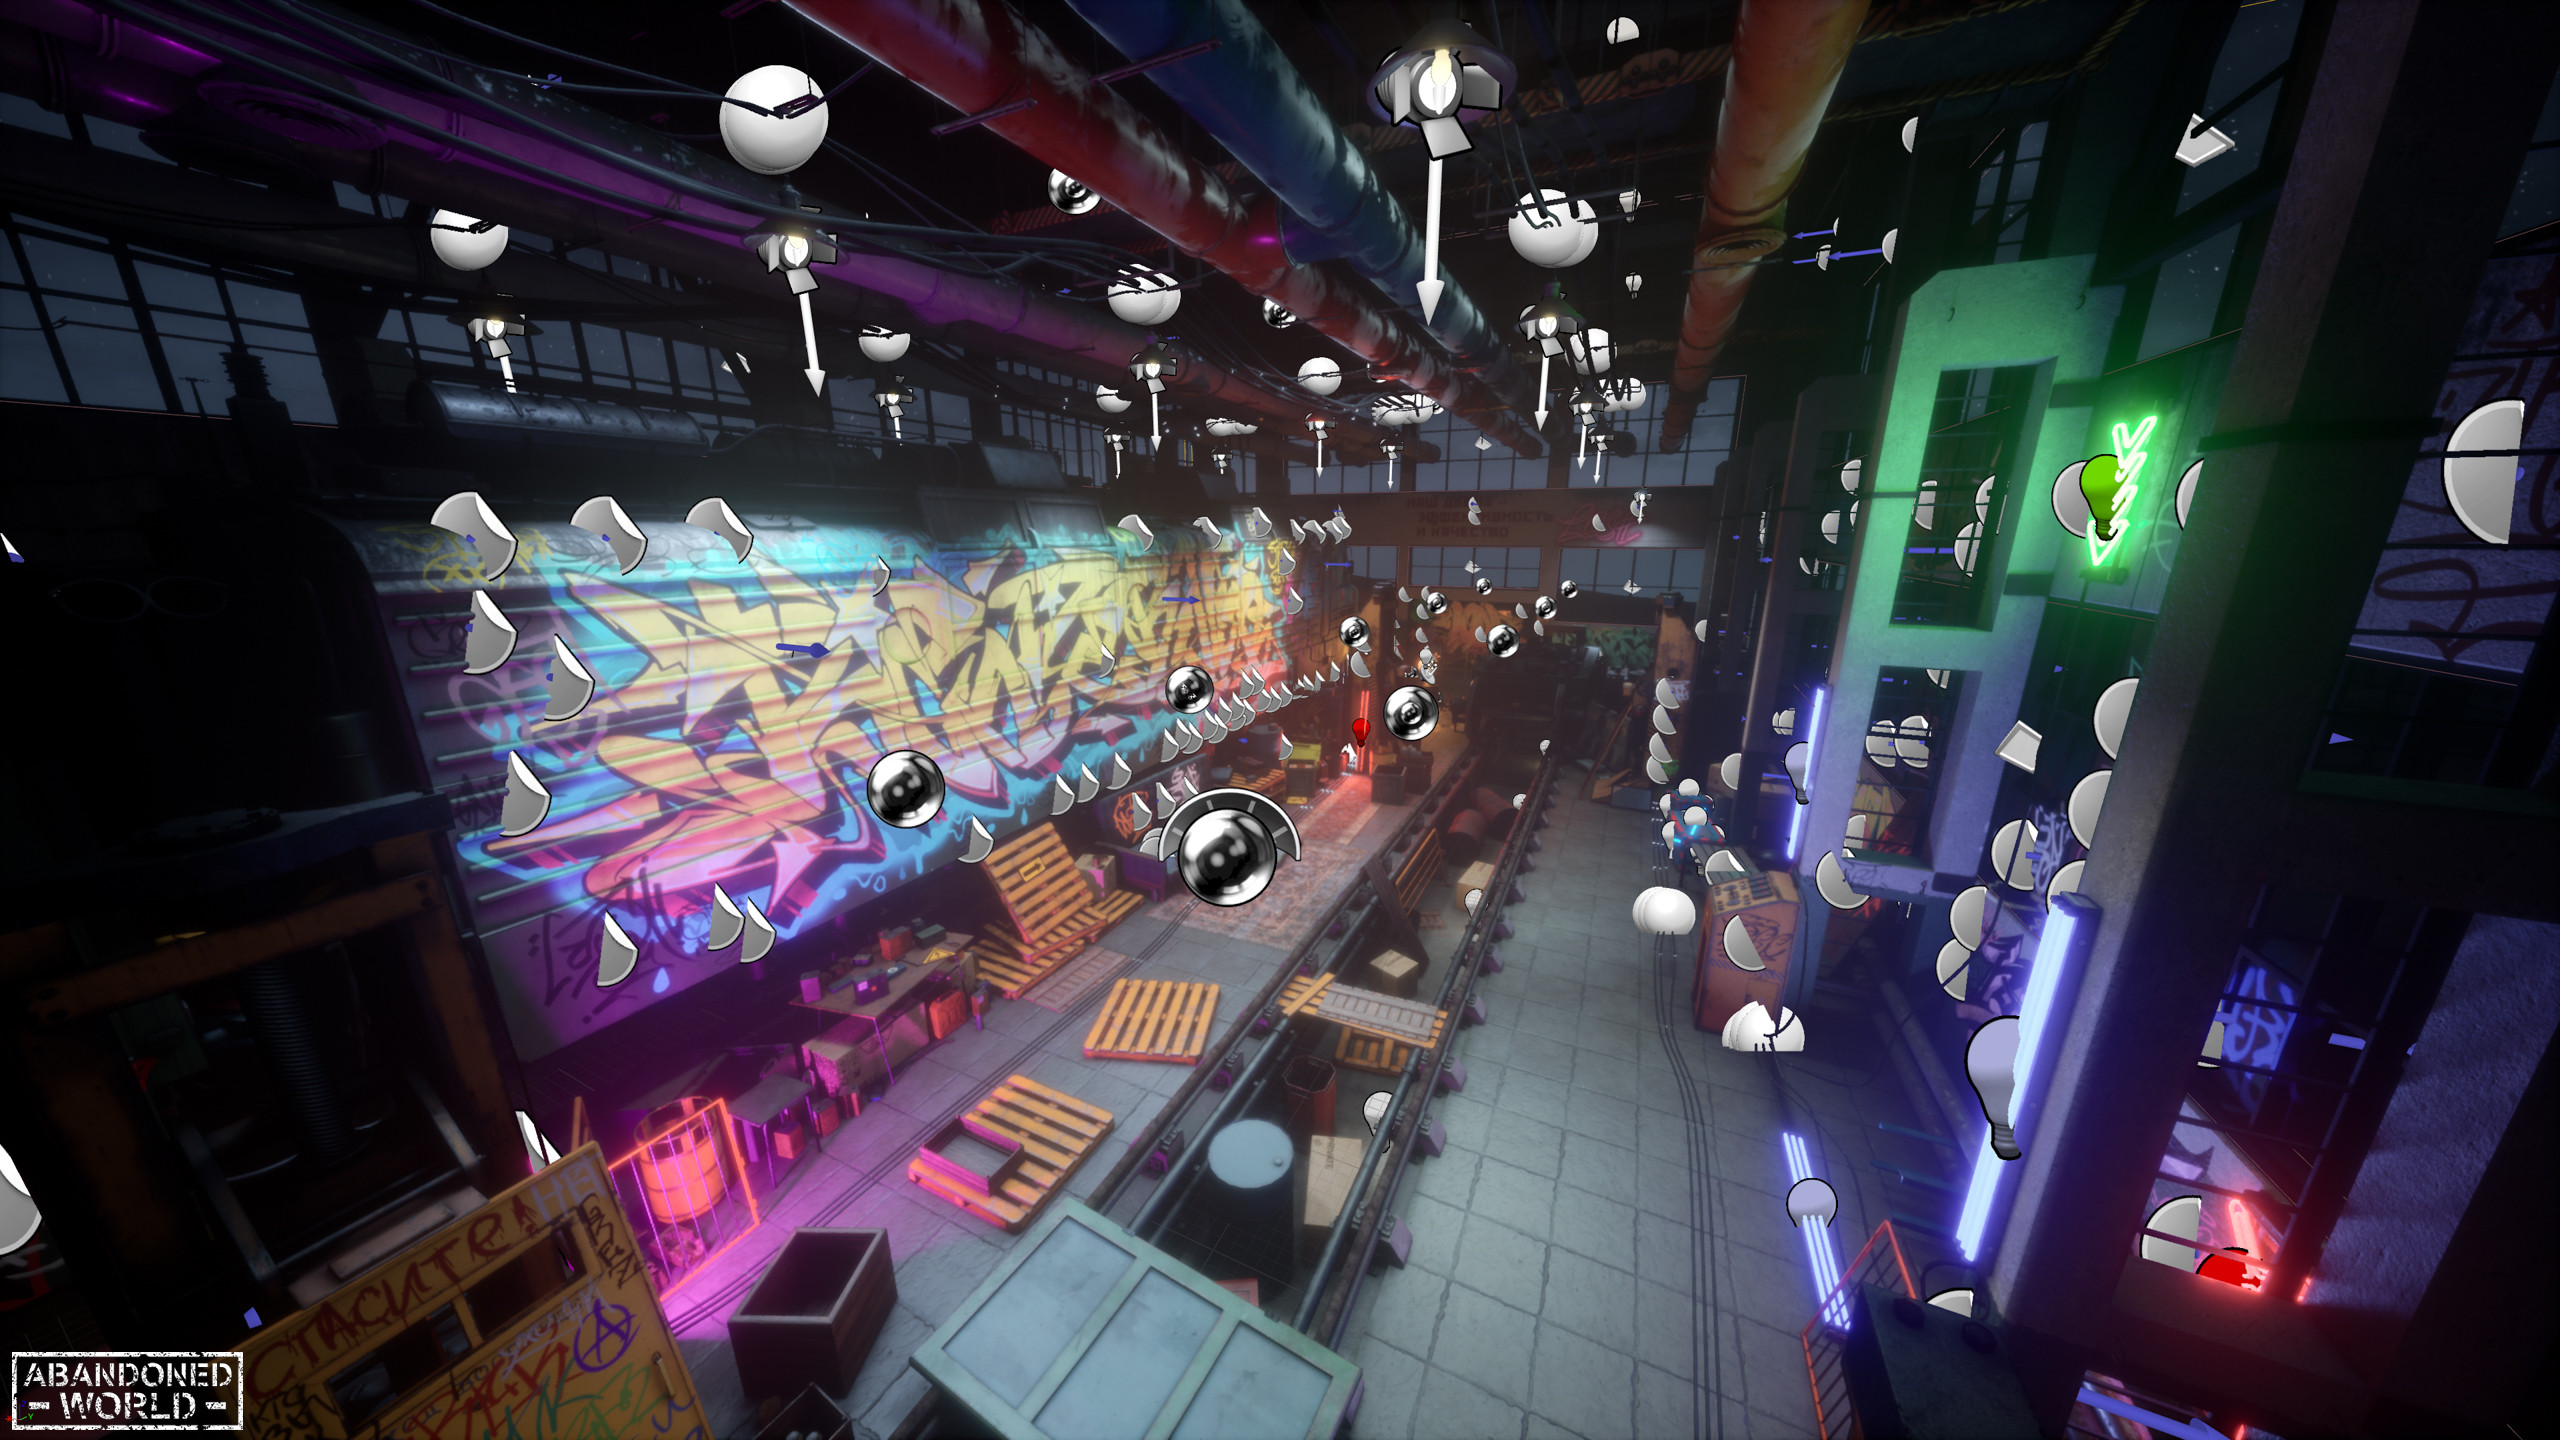 Image of the workspace from the Unreal Engine 4